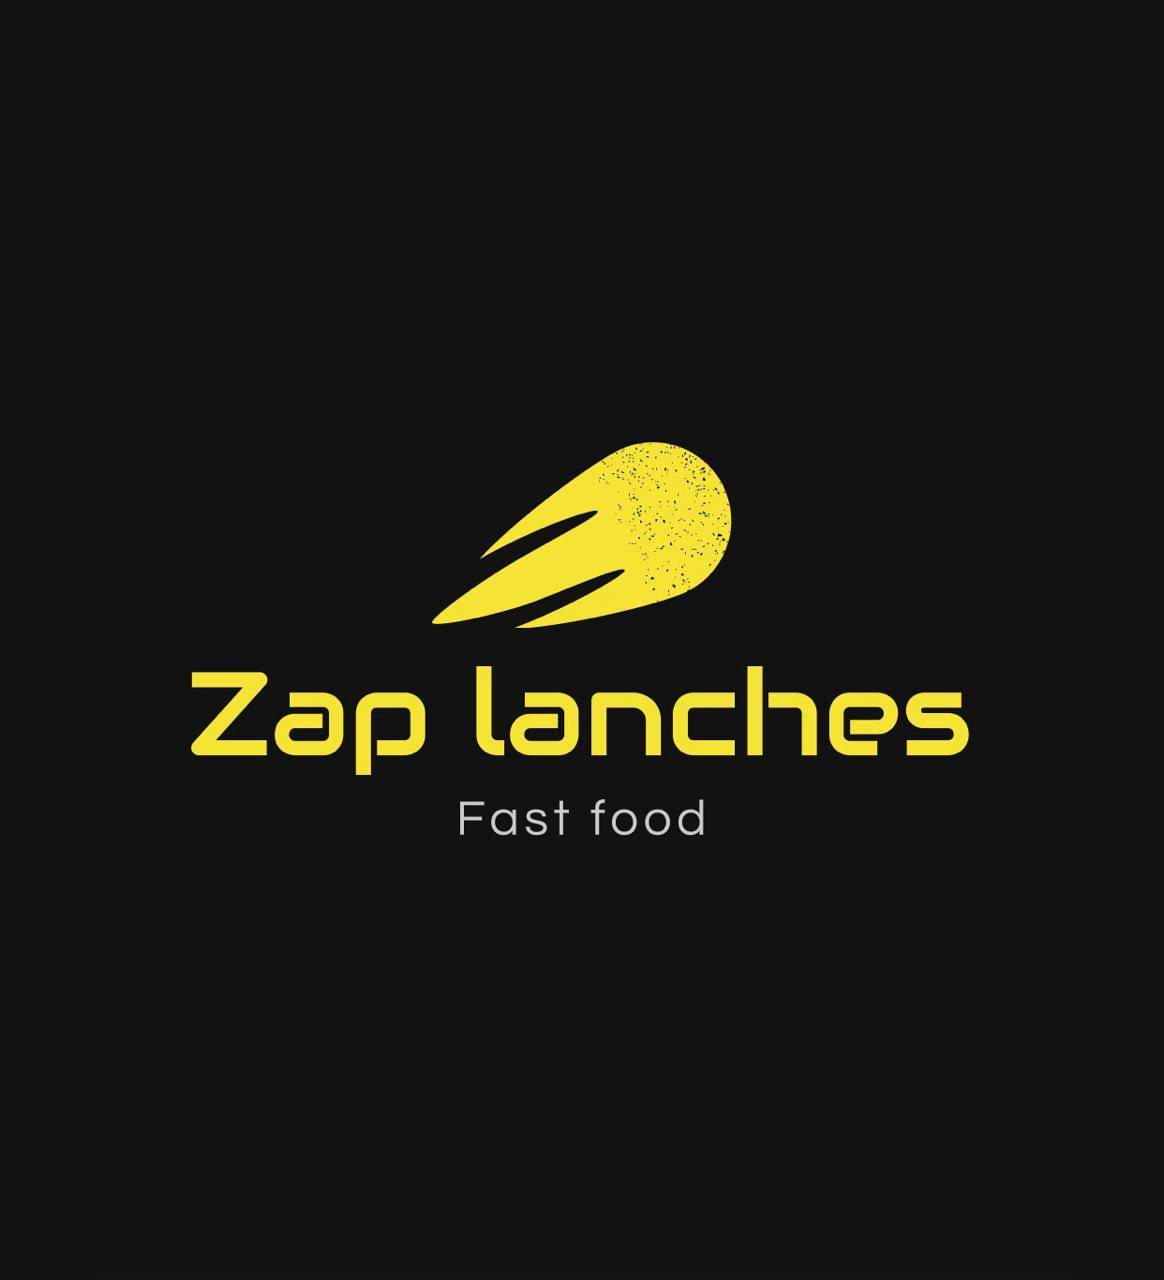 Zap Lanches